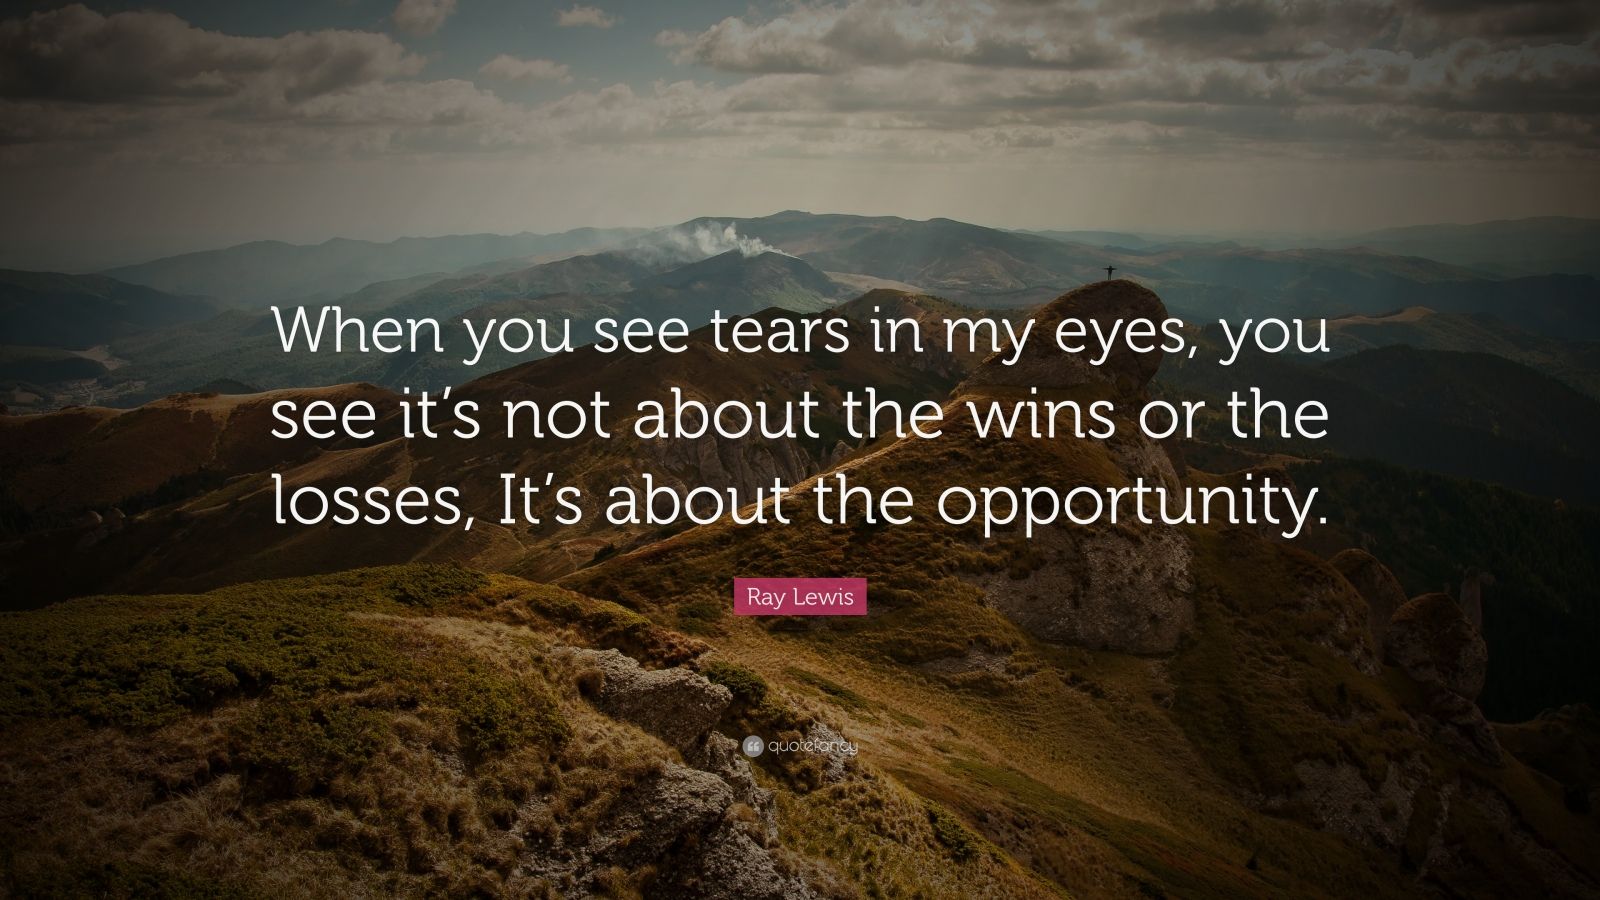 Ray Lewis Quote: “When you see tears in my eyes, you see it’s not about the wins ...